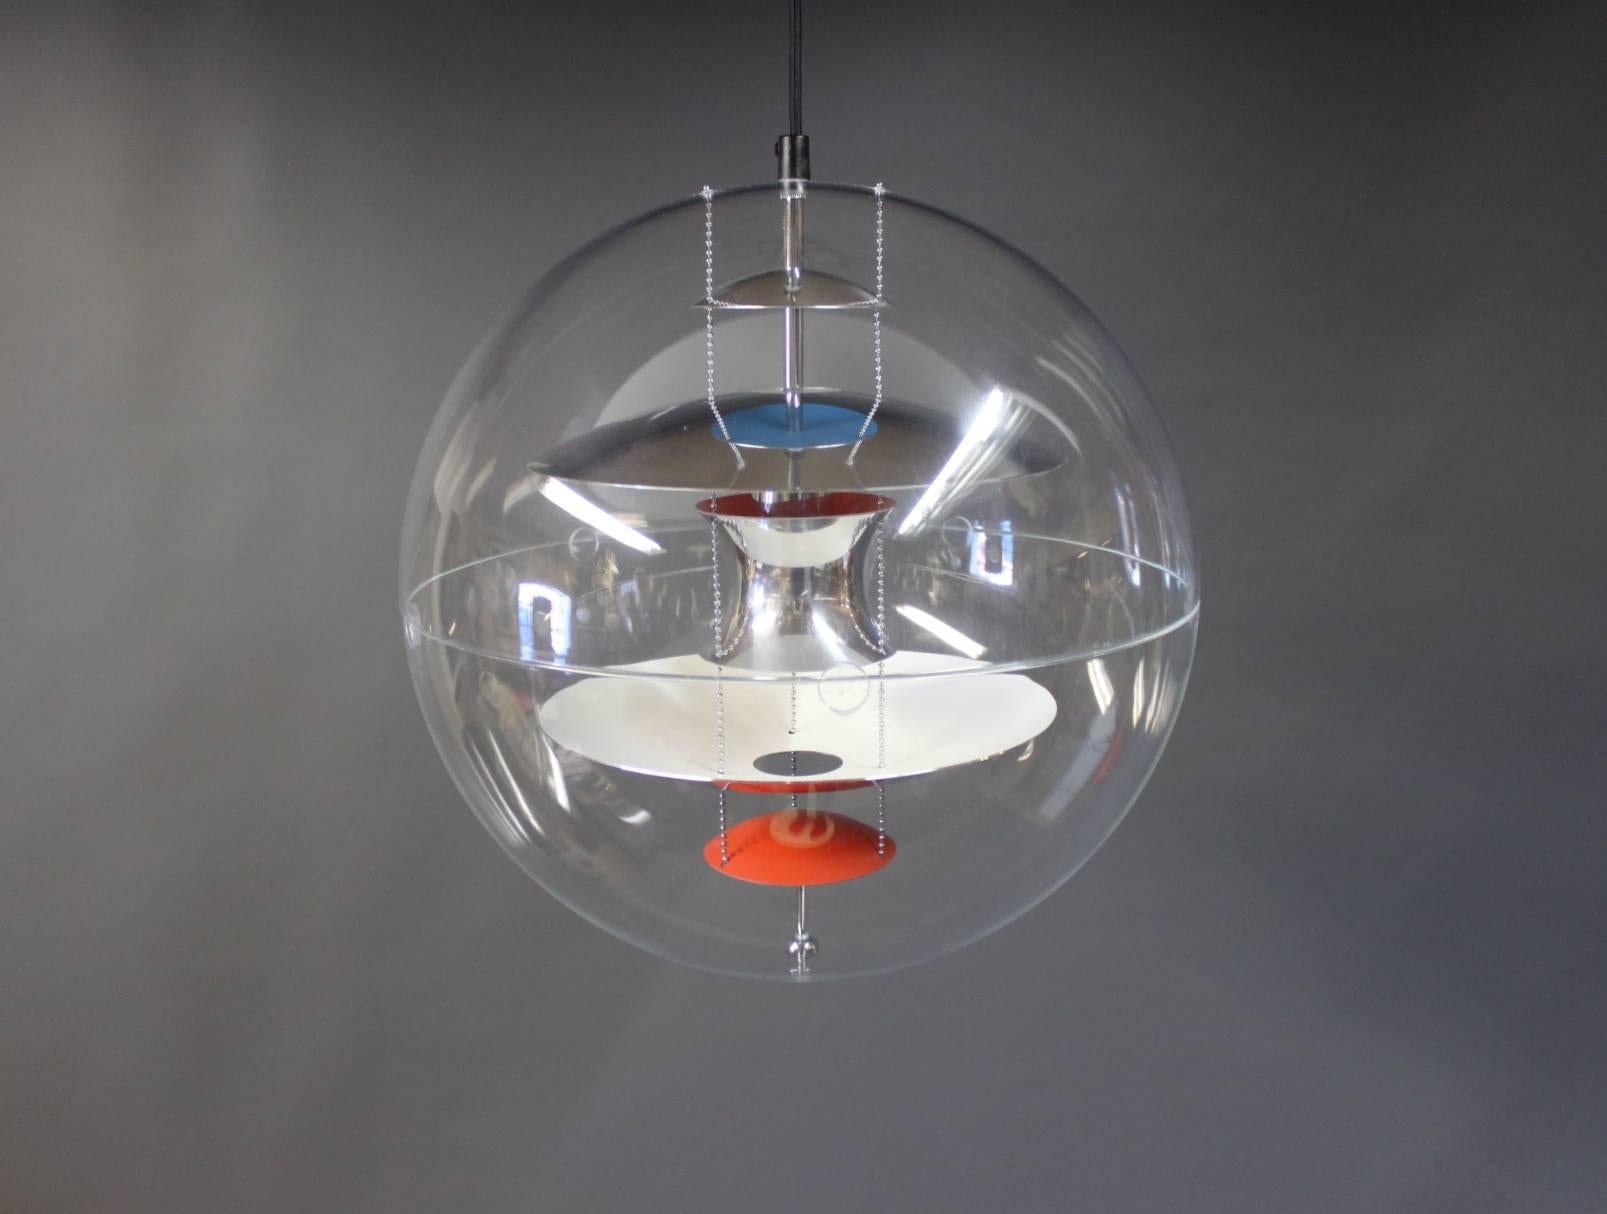 Verner Panton globe designed by Verner Panton in 1969. The lamp is a transparent acrylic globe with five hanging metal reflectors, which is lacquered in white, blue and red.